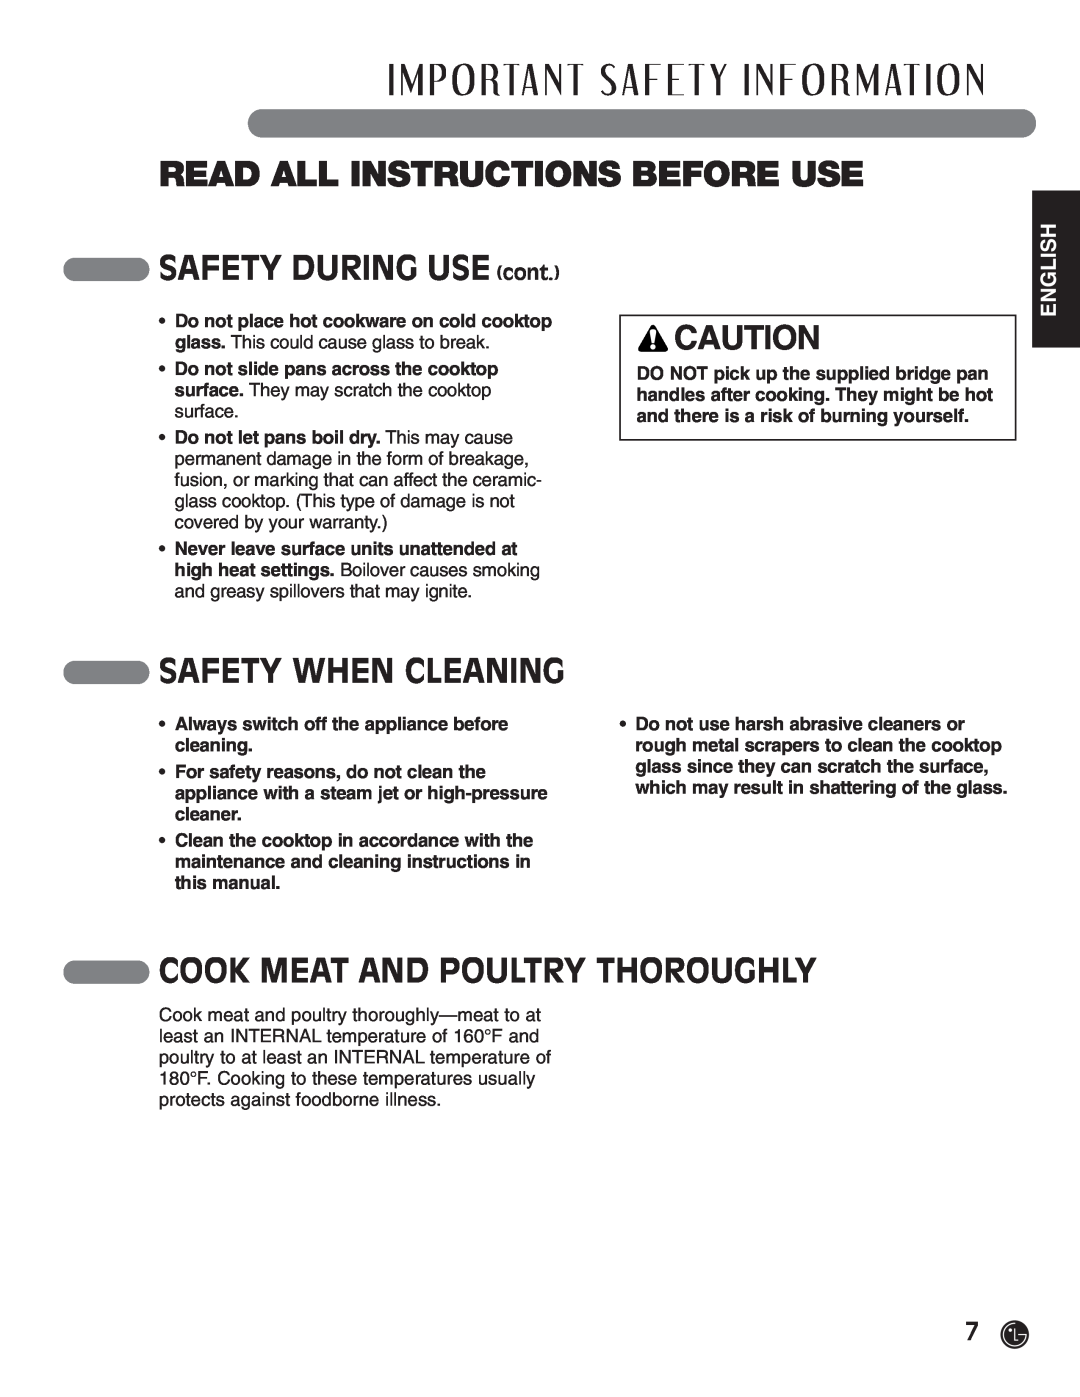 LG Electronics HN7413AG, LCE30845 SAFETY DURING USE cont, Safety When Cleaning, Cook Meat And Poultry Thoroughly, English 